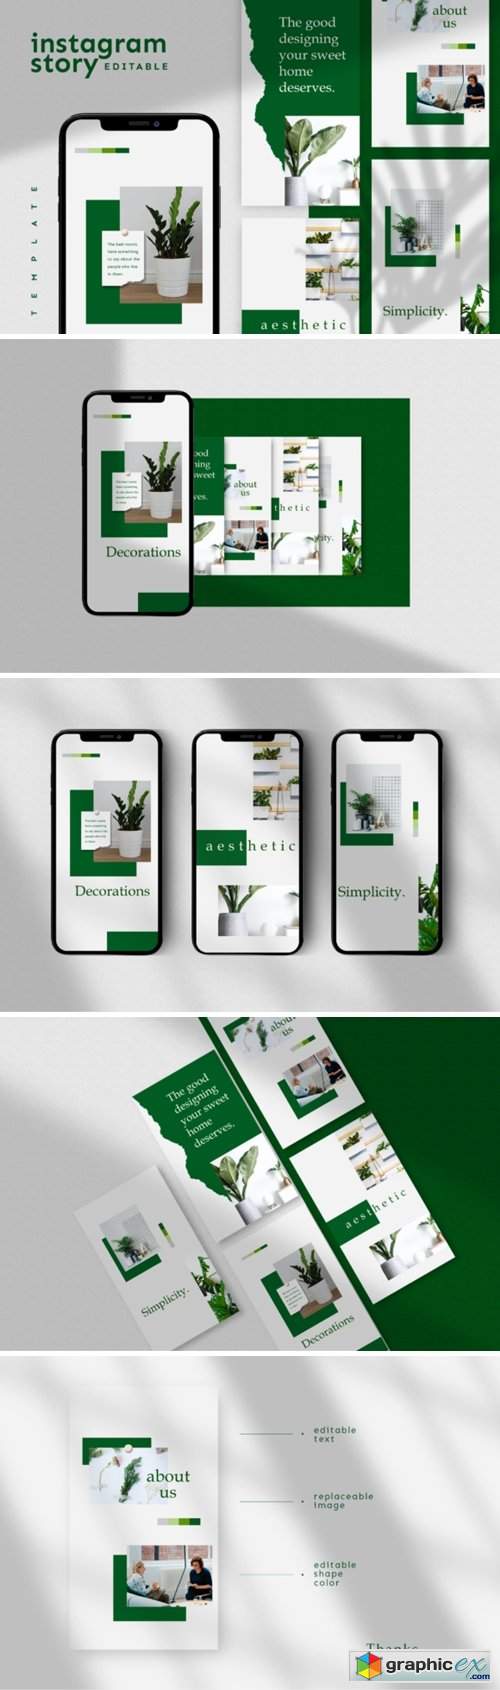  Instagram Story Template 3884618 